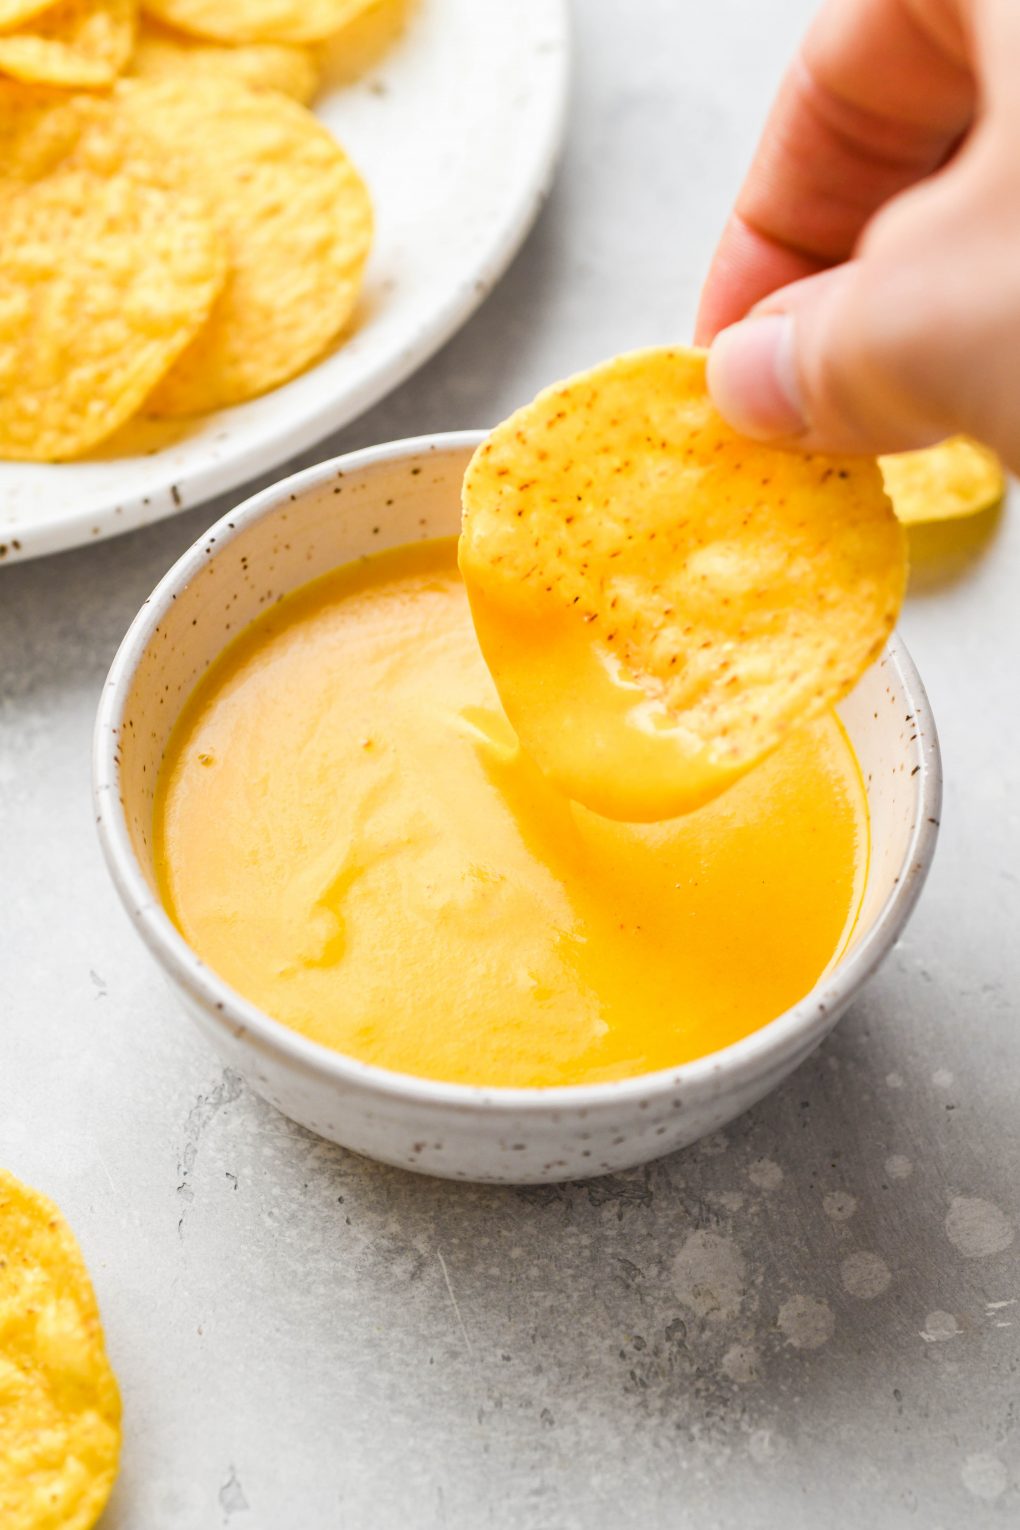 A hand dipping a round tortilla chip into a small bowl of velvety vegan cheese sauce, next to a shallow bowl of tortilla chips - on a light colored surface.